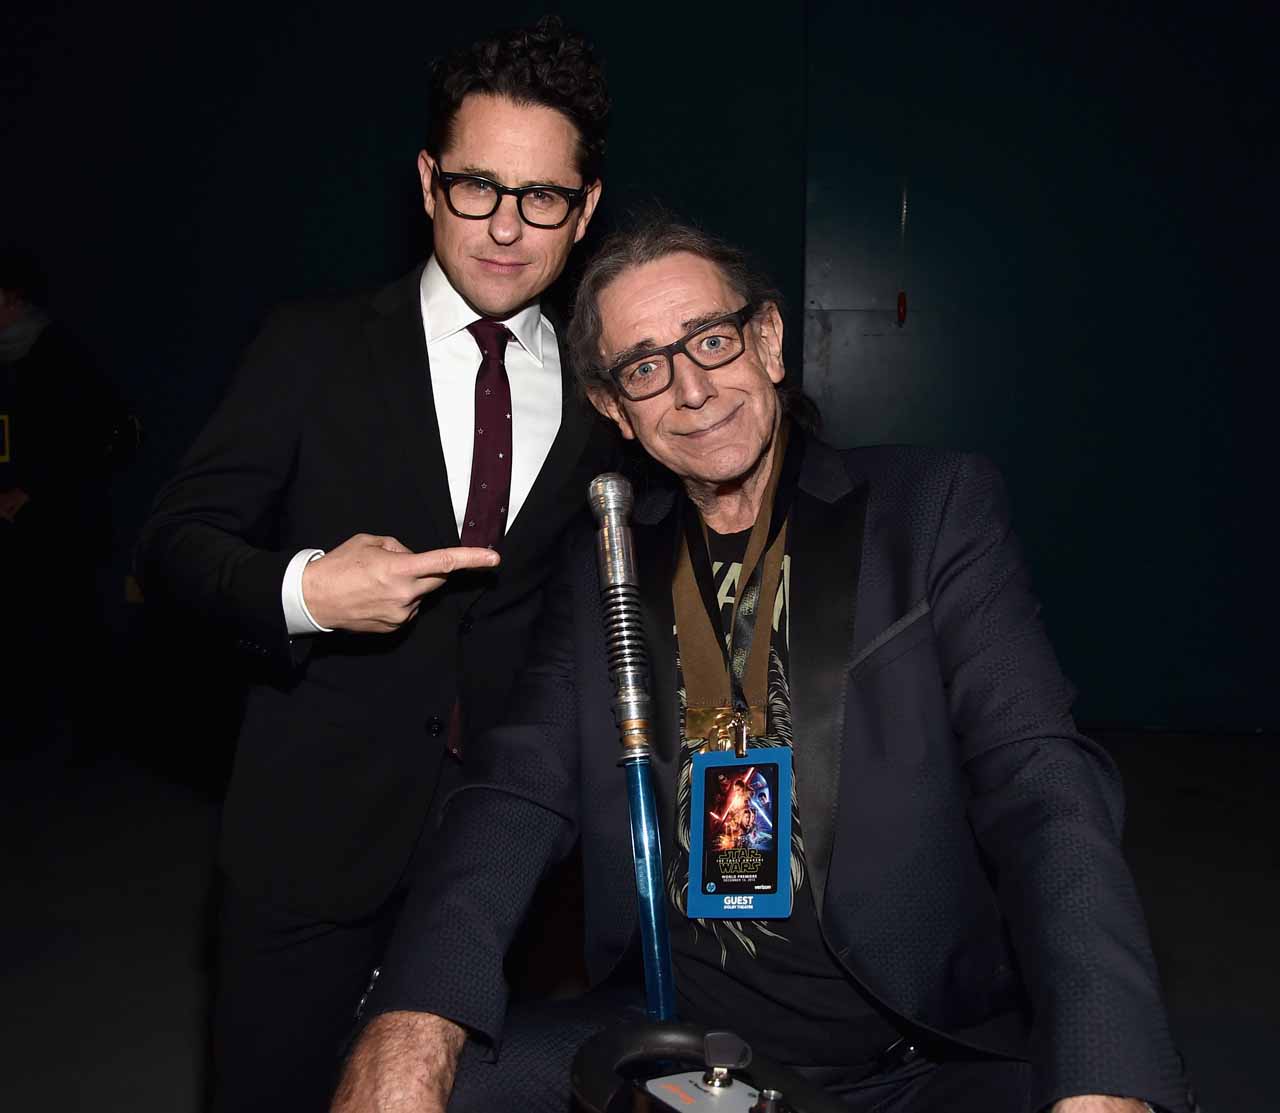 HOLLYWOOD, CA - DECEMBER 14: Director J.J. Abrams (L) and actor Peter Mayhew attend the World Premiere of ?Star Wars: The Force Awakens? at the Dolby, El Capitan, and TCL Theatres on December 14, 2015 in Hollywood, California.  (Photo by Alberto E. Rodriguez/Getty Images for Disney) *** Local Caption *** J.J. Abrams;Peter Mayhew